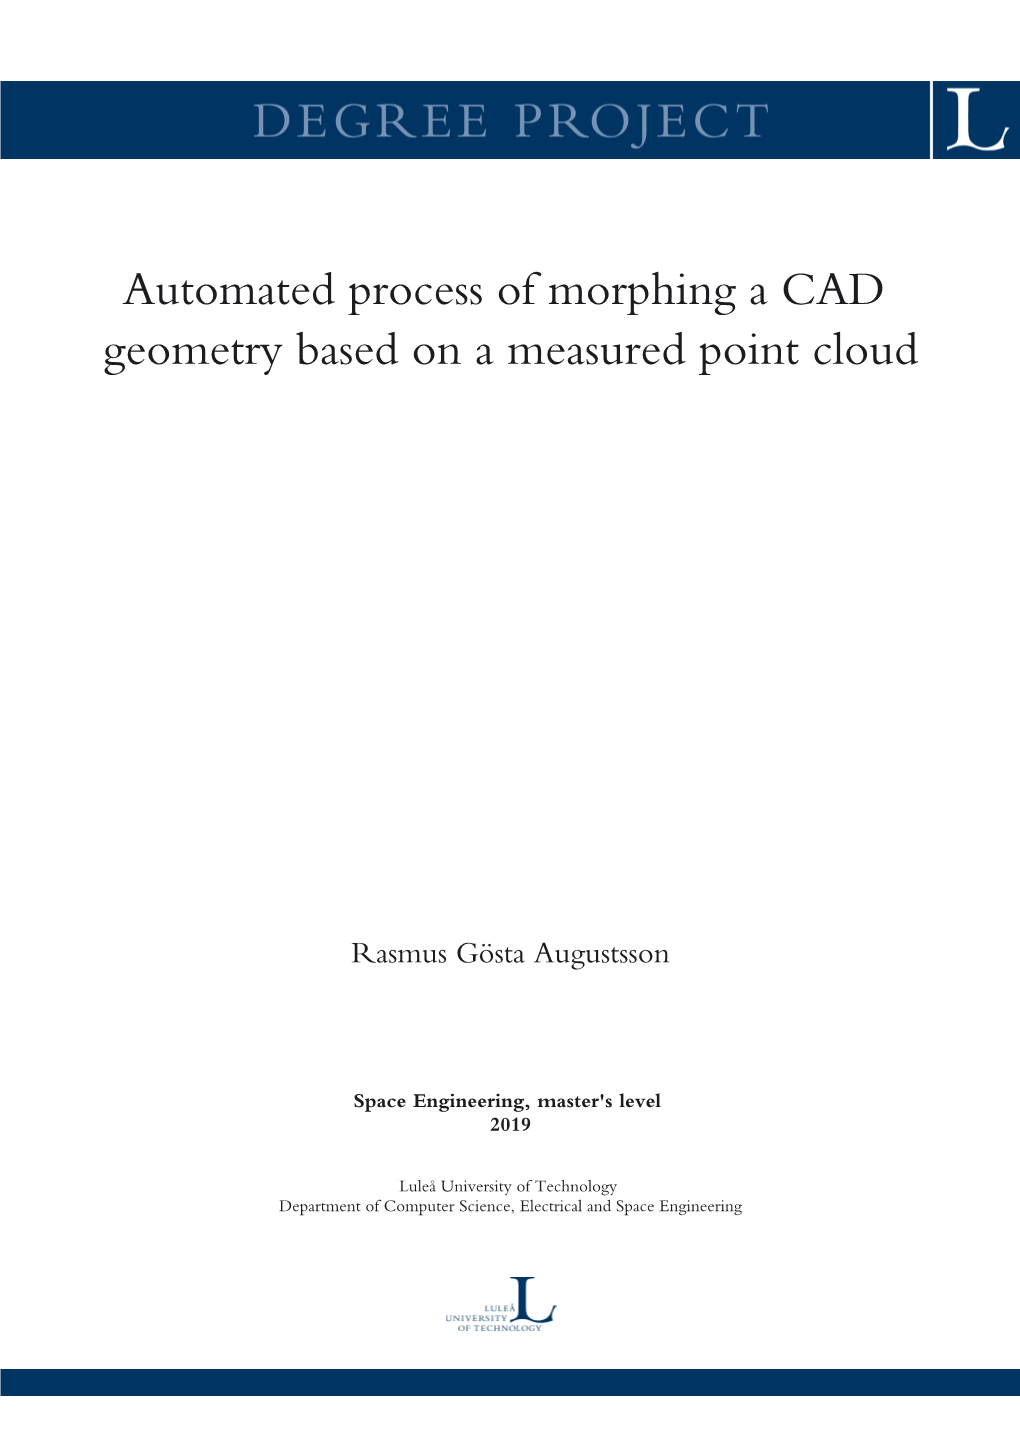 Automated Process of Morphing a CAD Geometry Based on a Measured Point Cloud